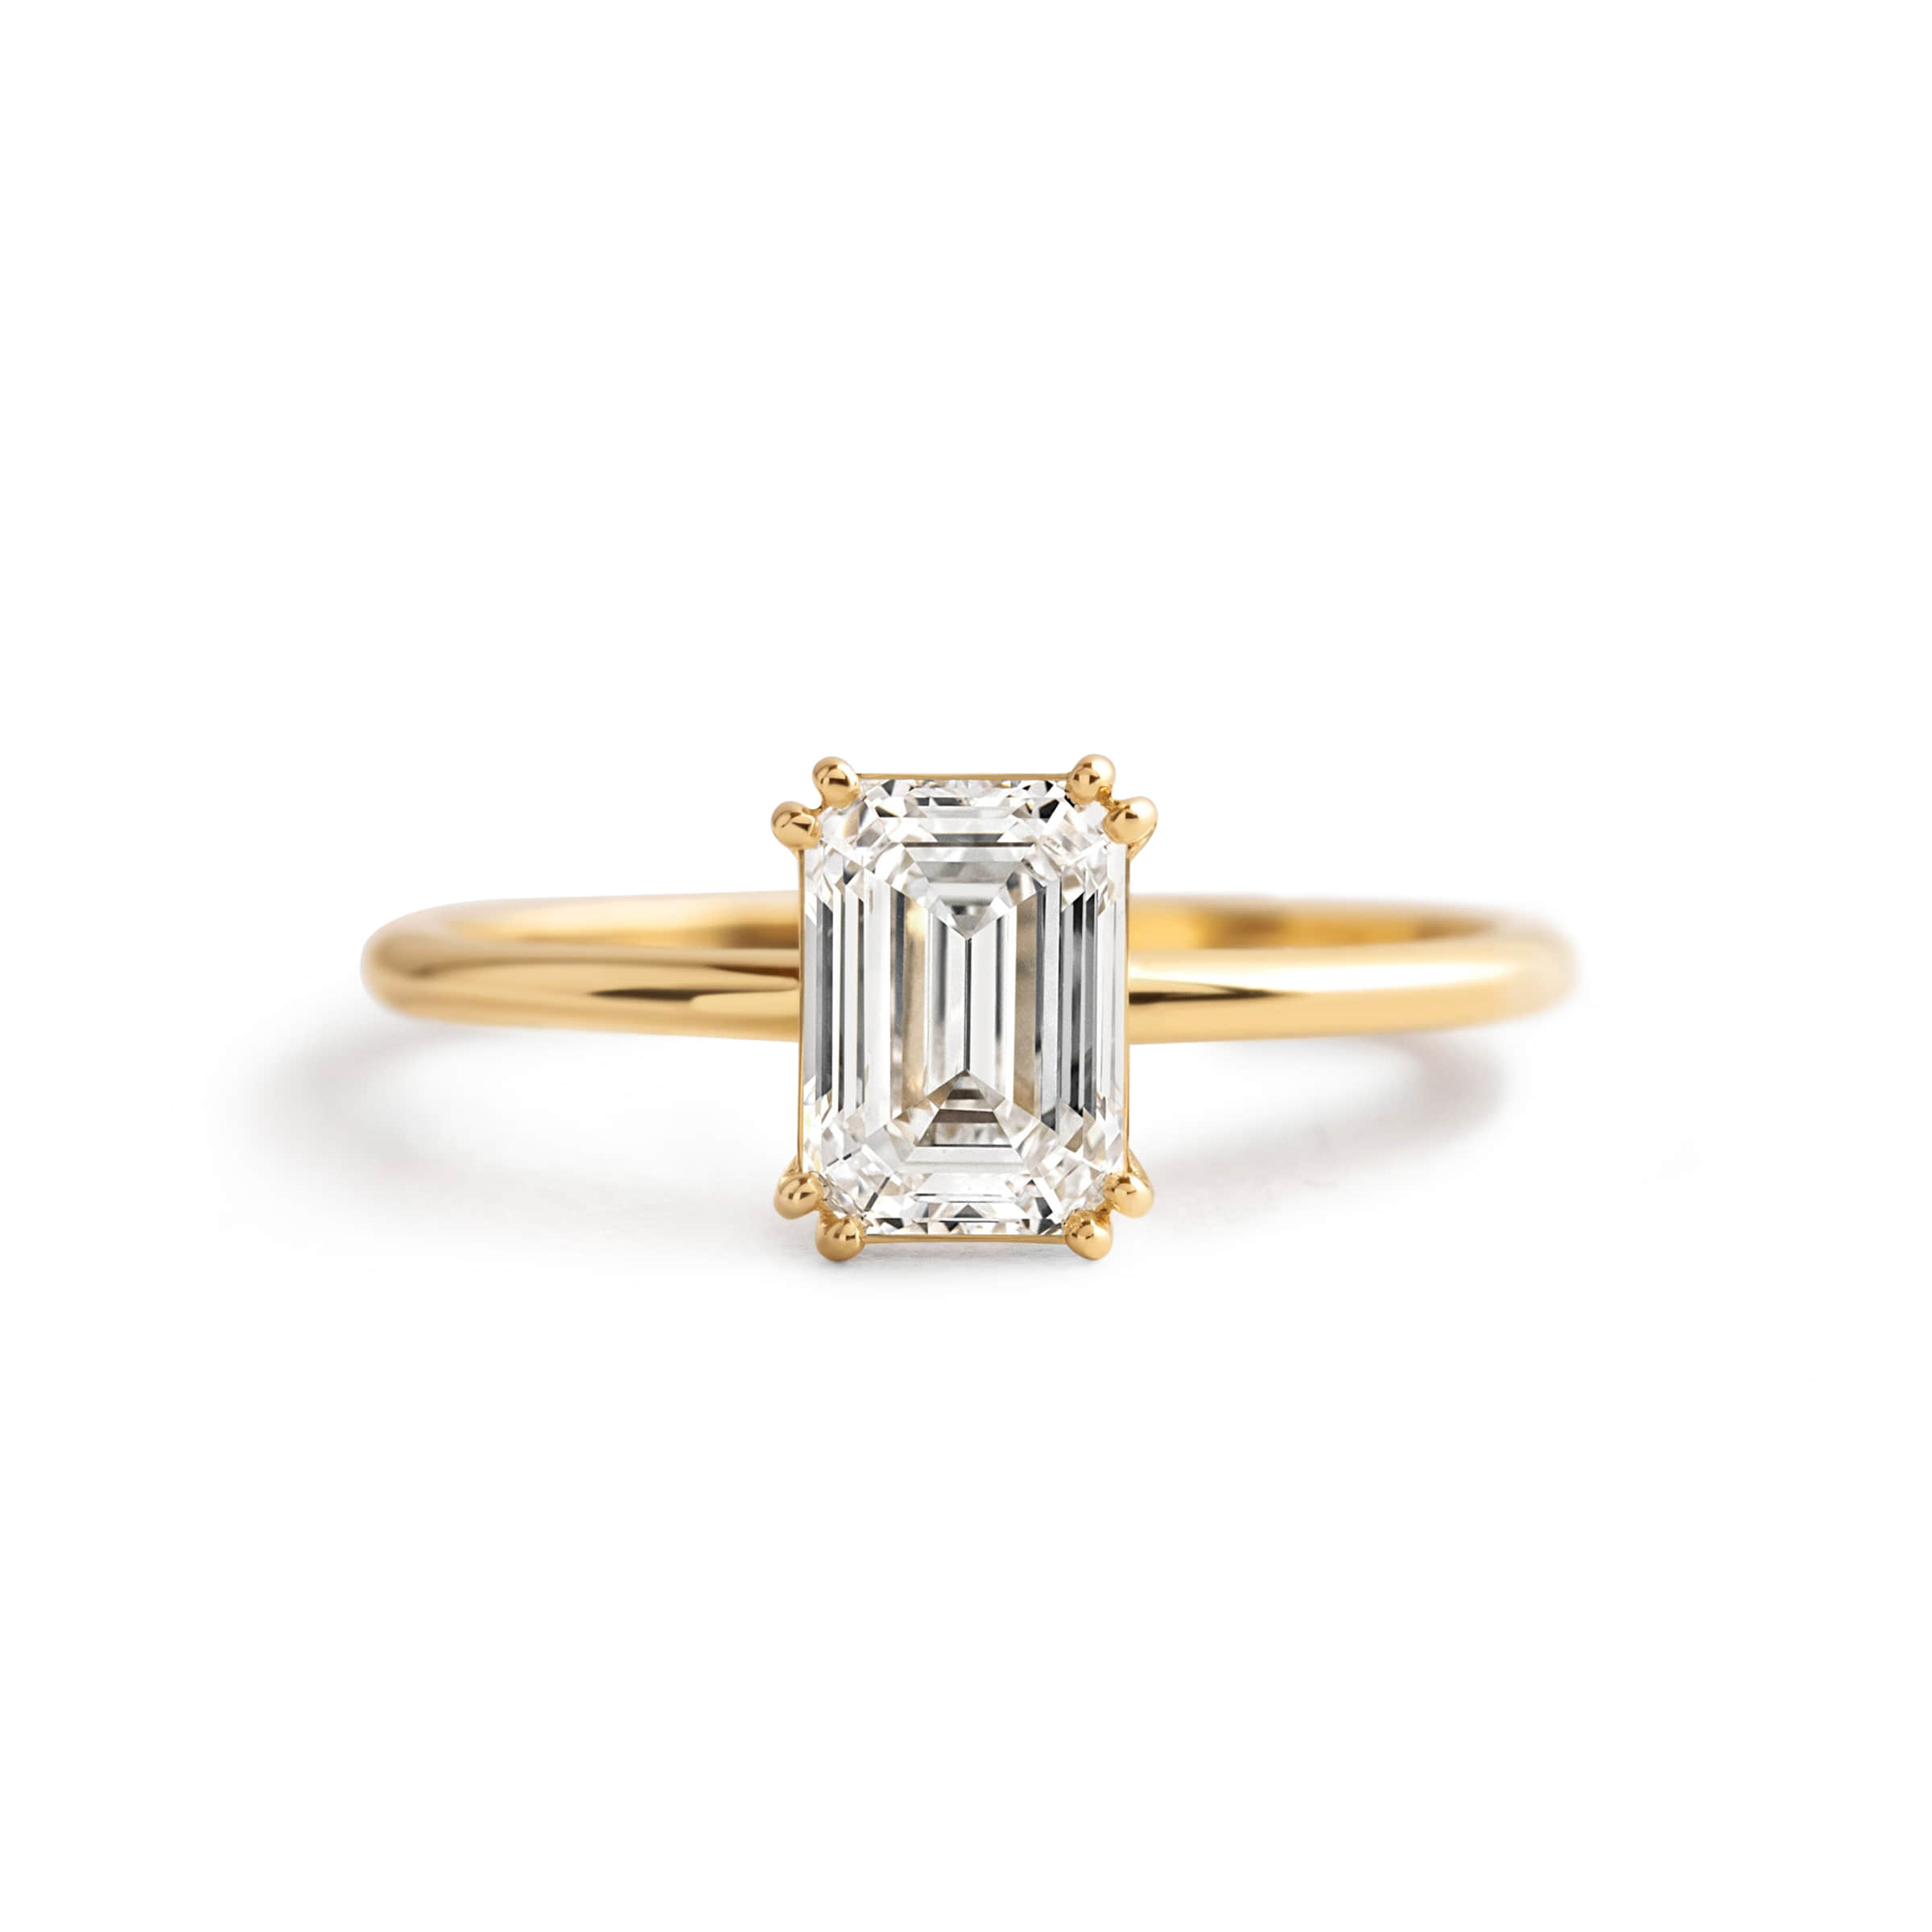 Darry Ring emerald cut engagement ring yellow gold